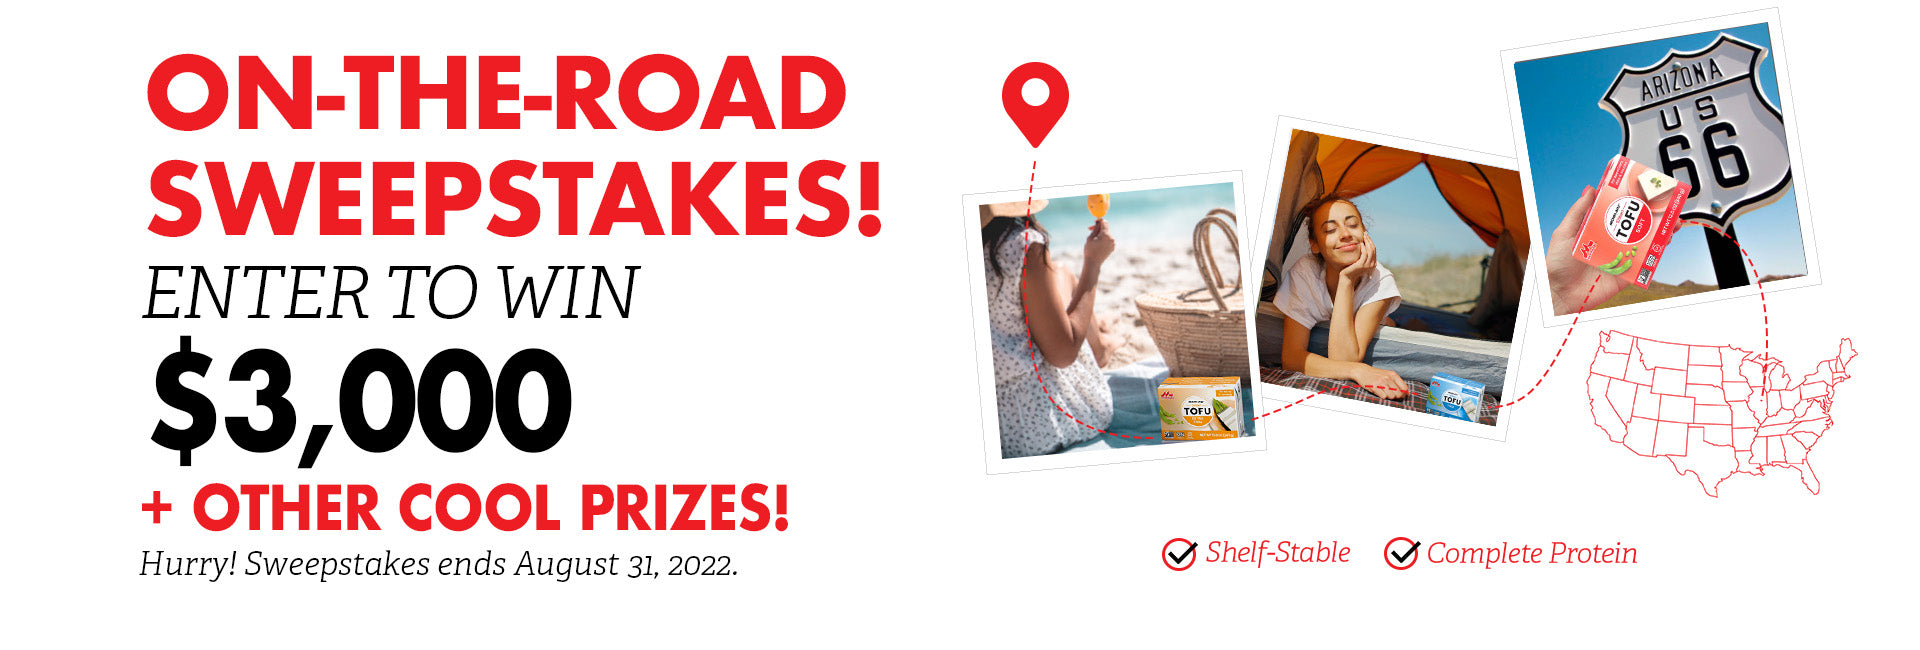 Enter the On-The-Road Sweepstakes before August 31, 2022 for a chance to win $3,000 and other cool prizes! See Terms and Conditions and check out the Mori-Nu Silken Tofu Instagram post for instructions.